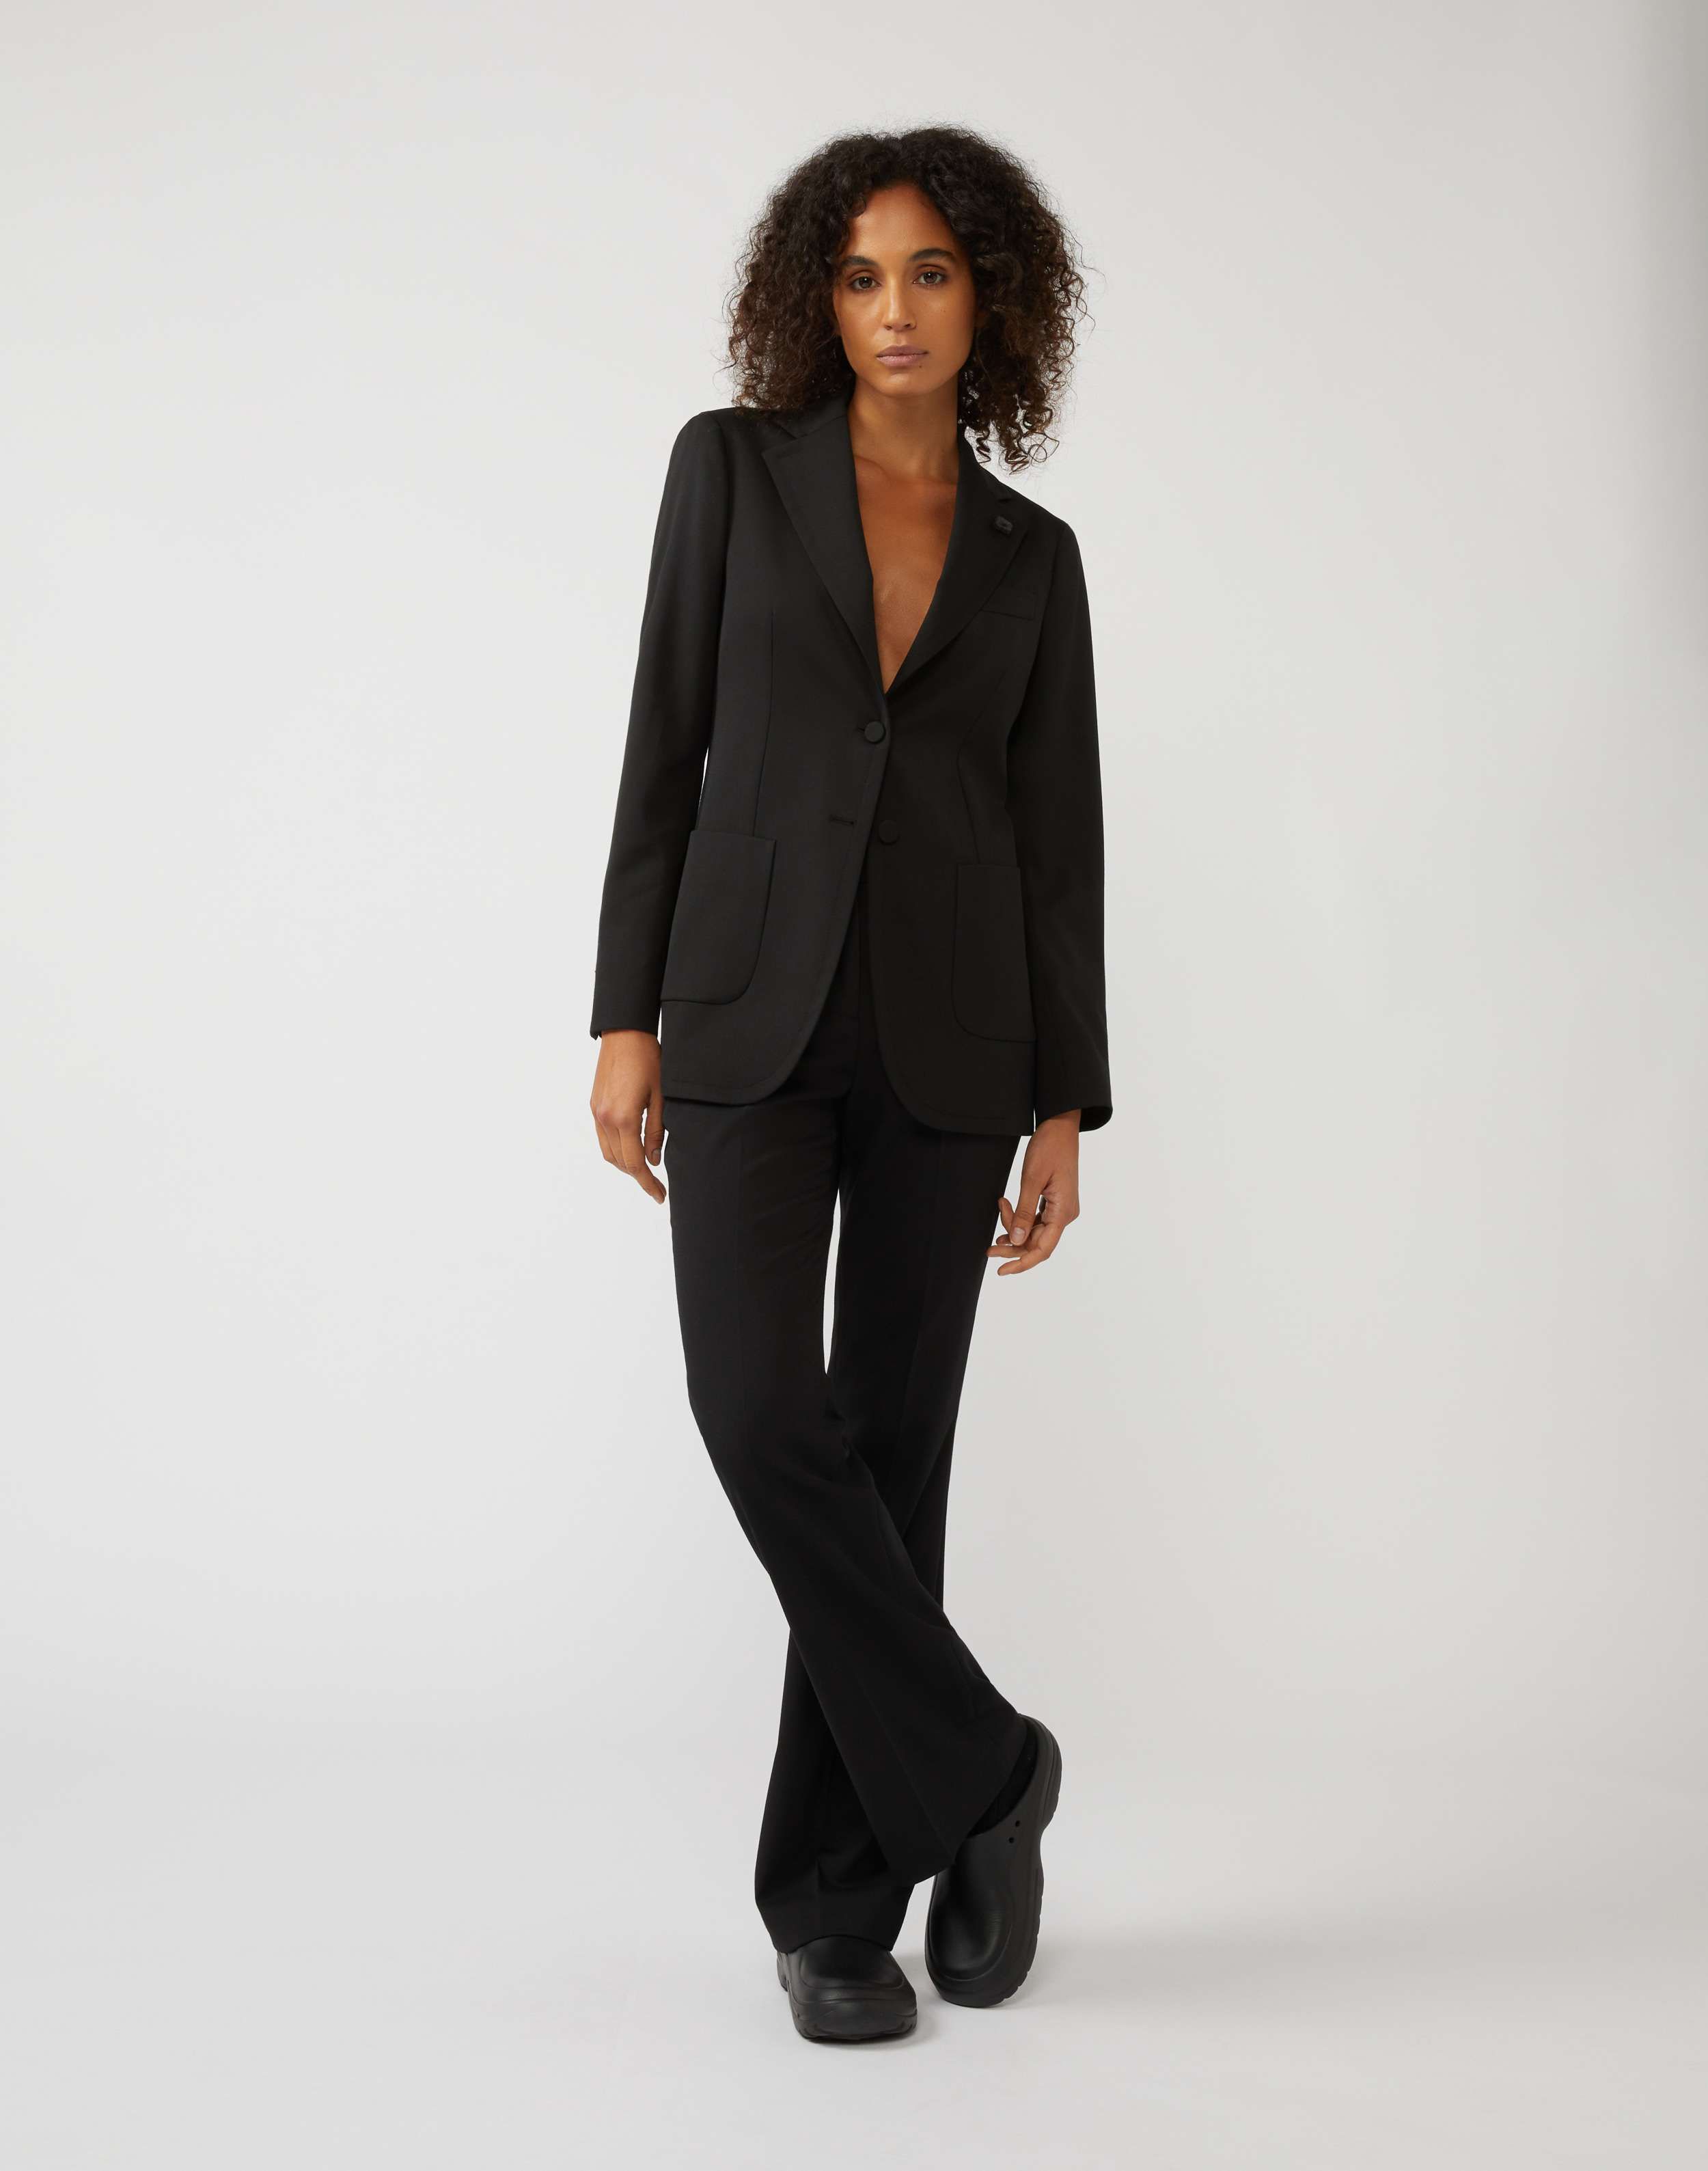 Jacket in stretchy black cool wool 